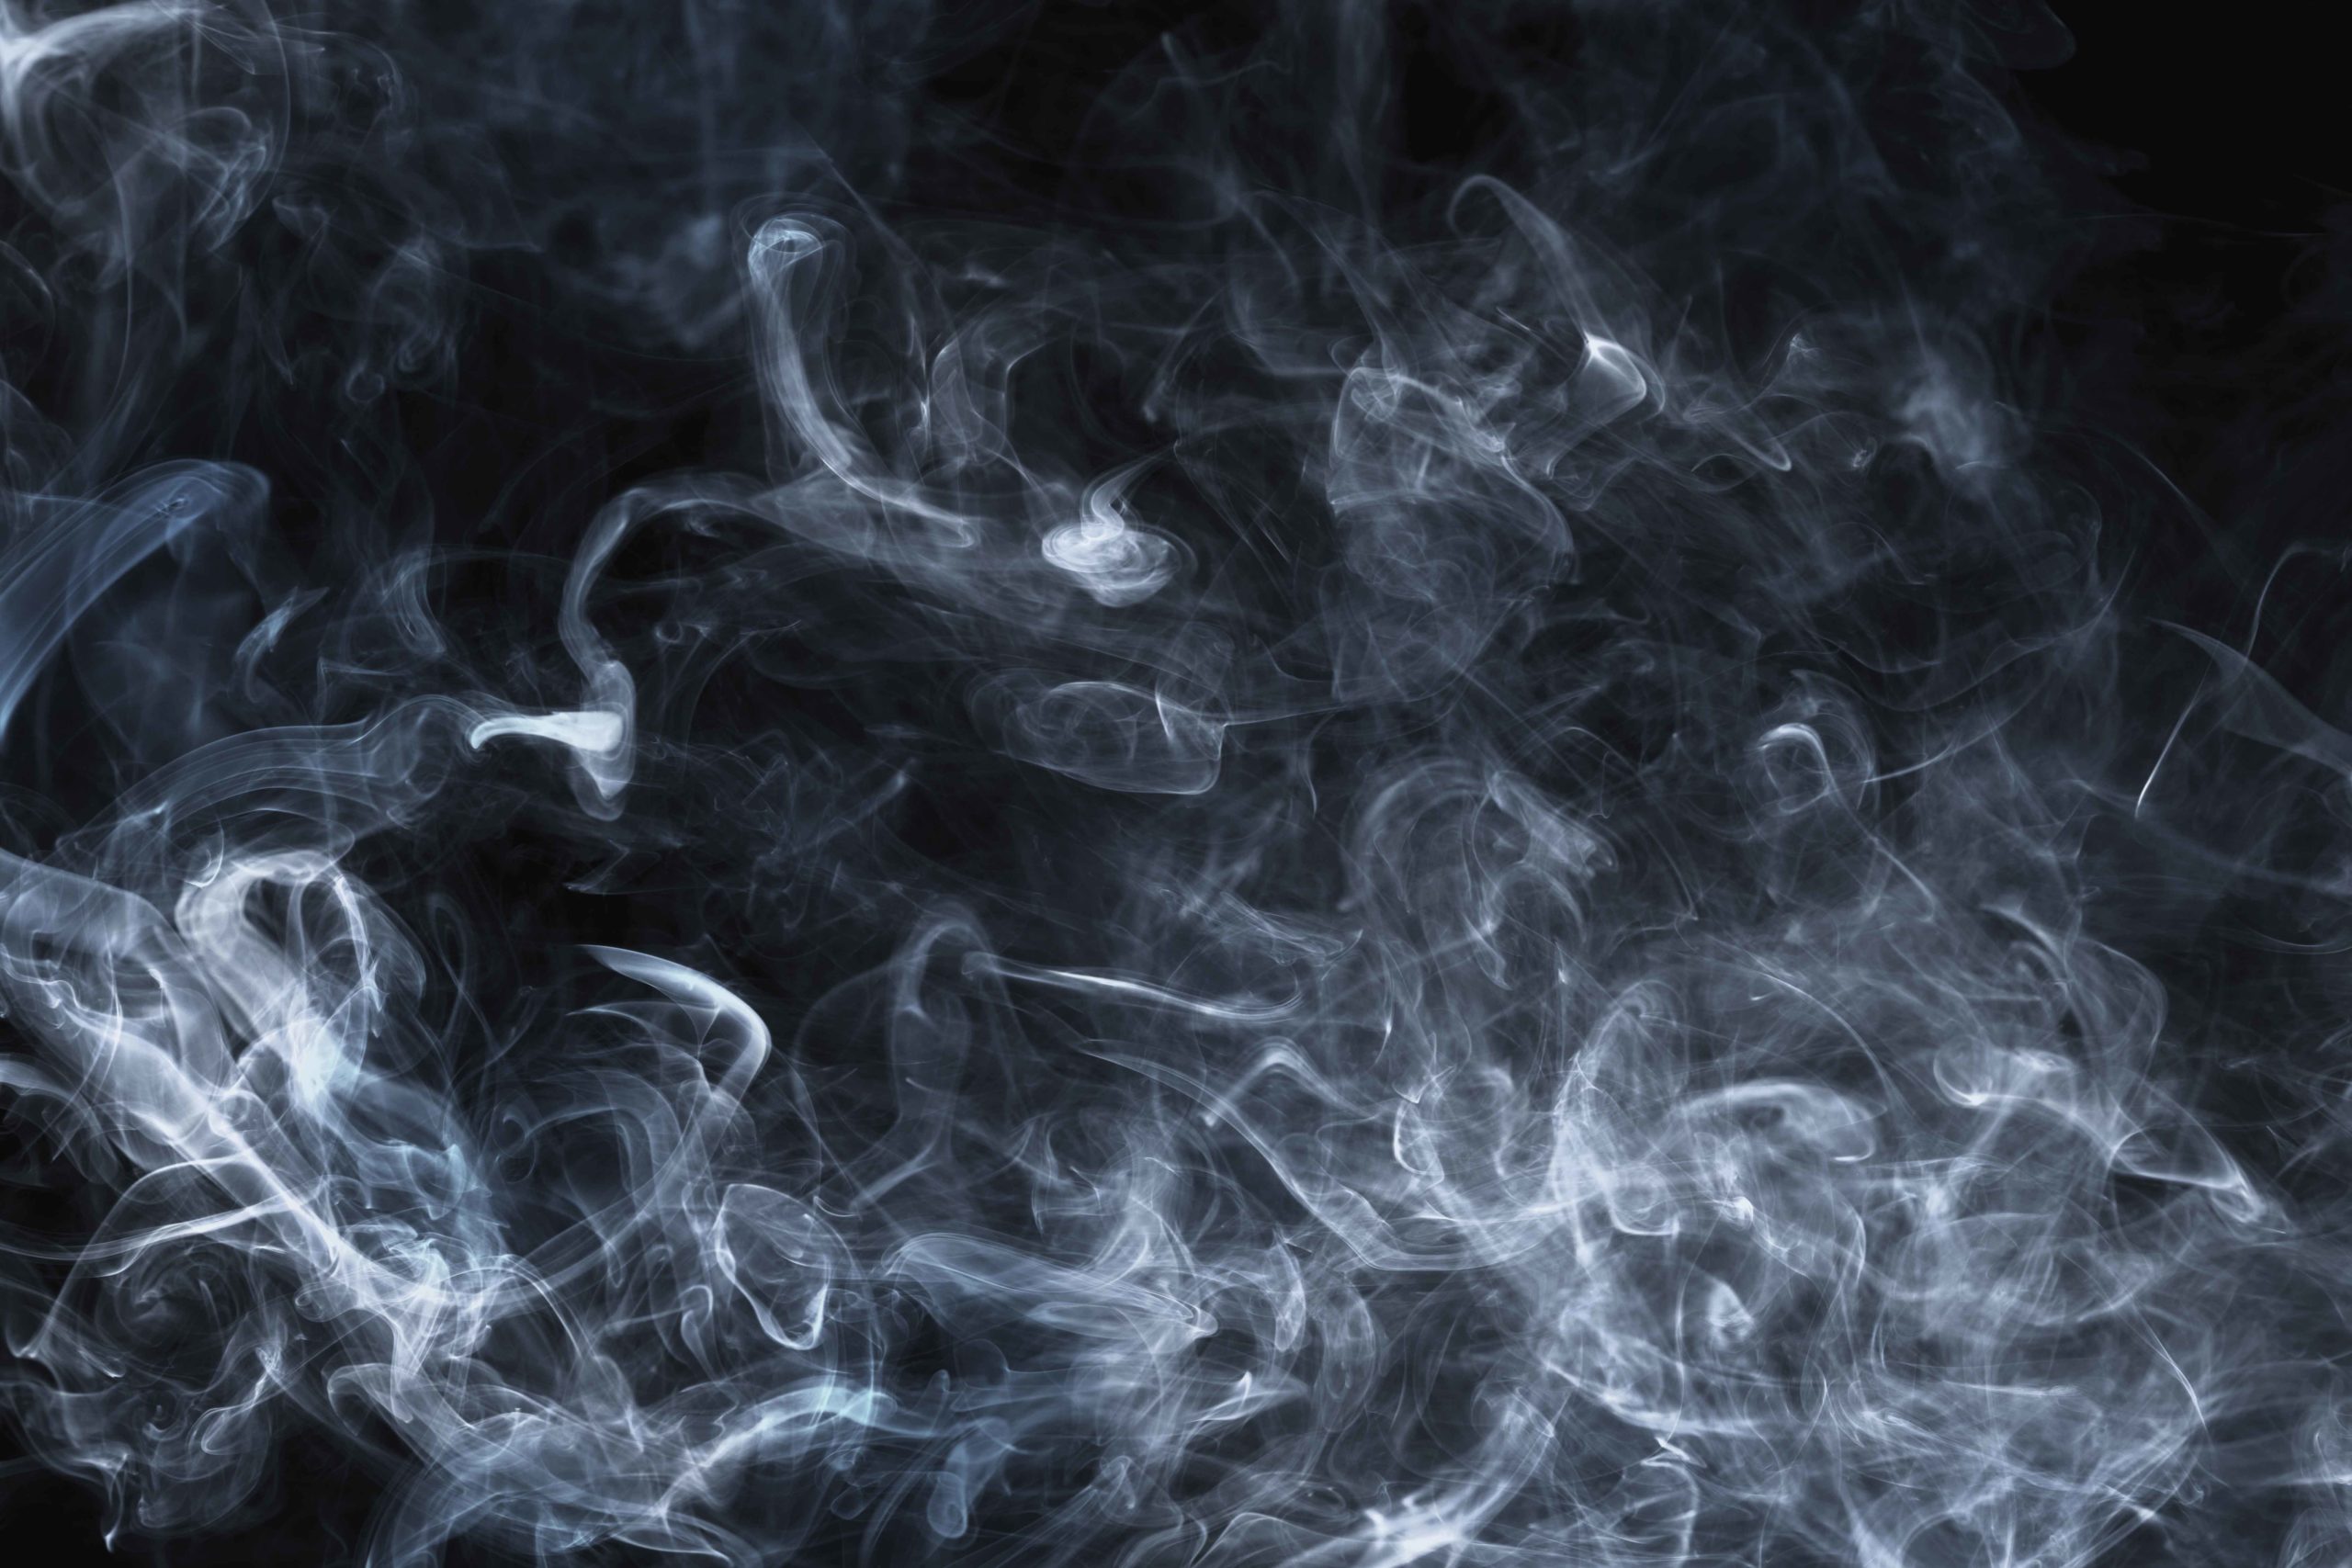 Carbonyls and Carbon Monoxide Emissions from Electronic Cigarettes